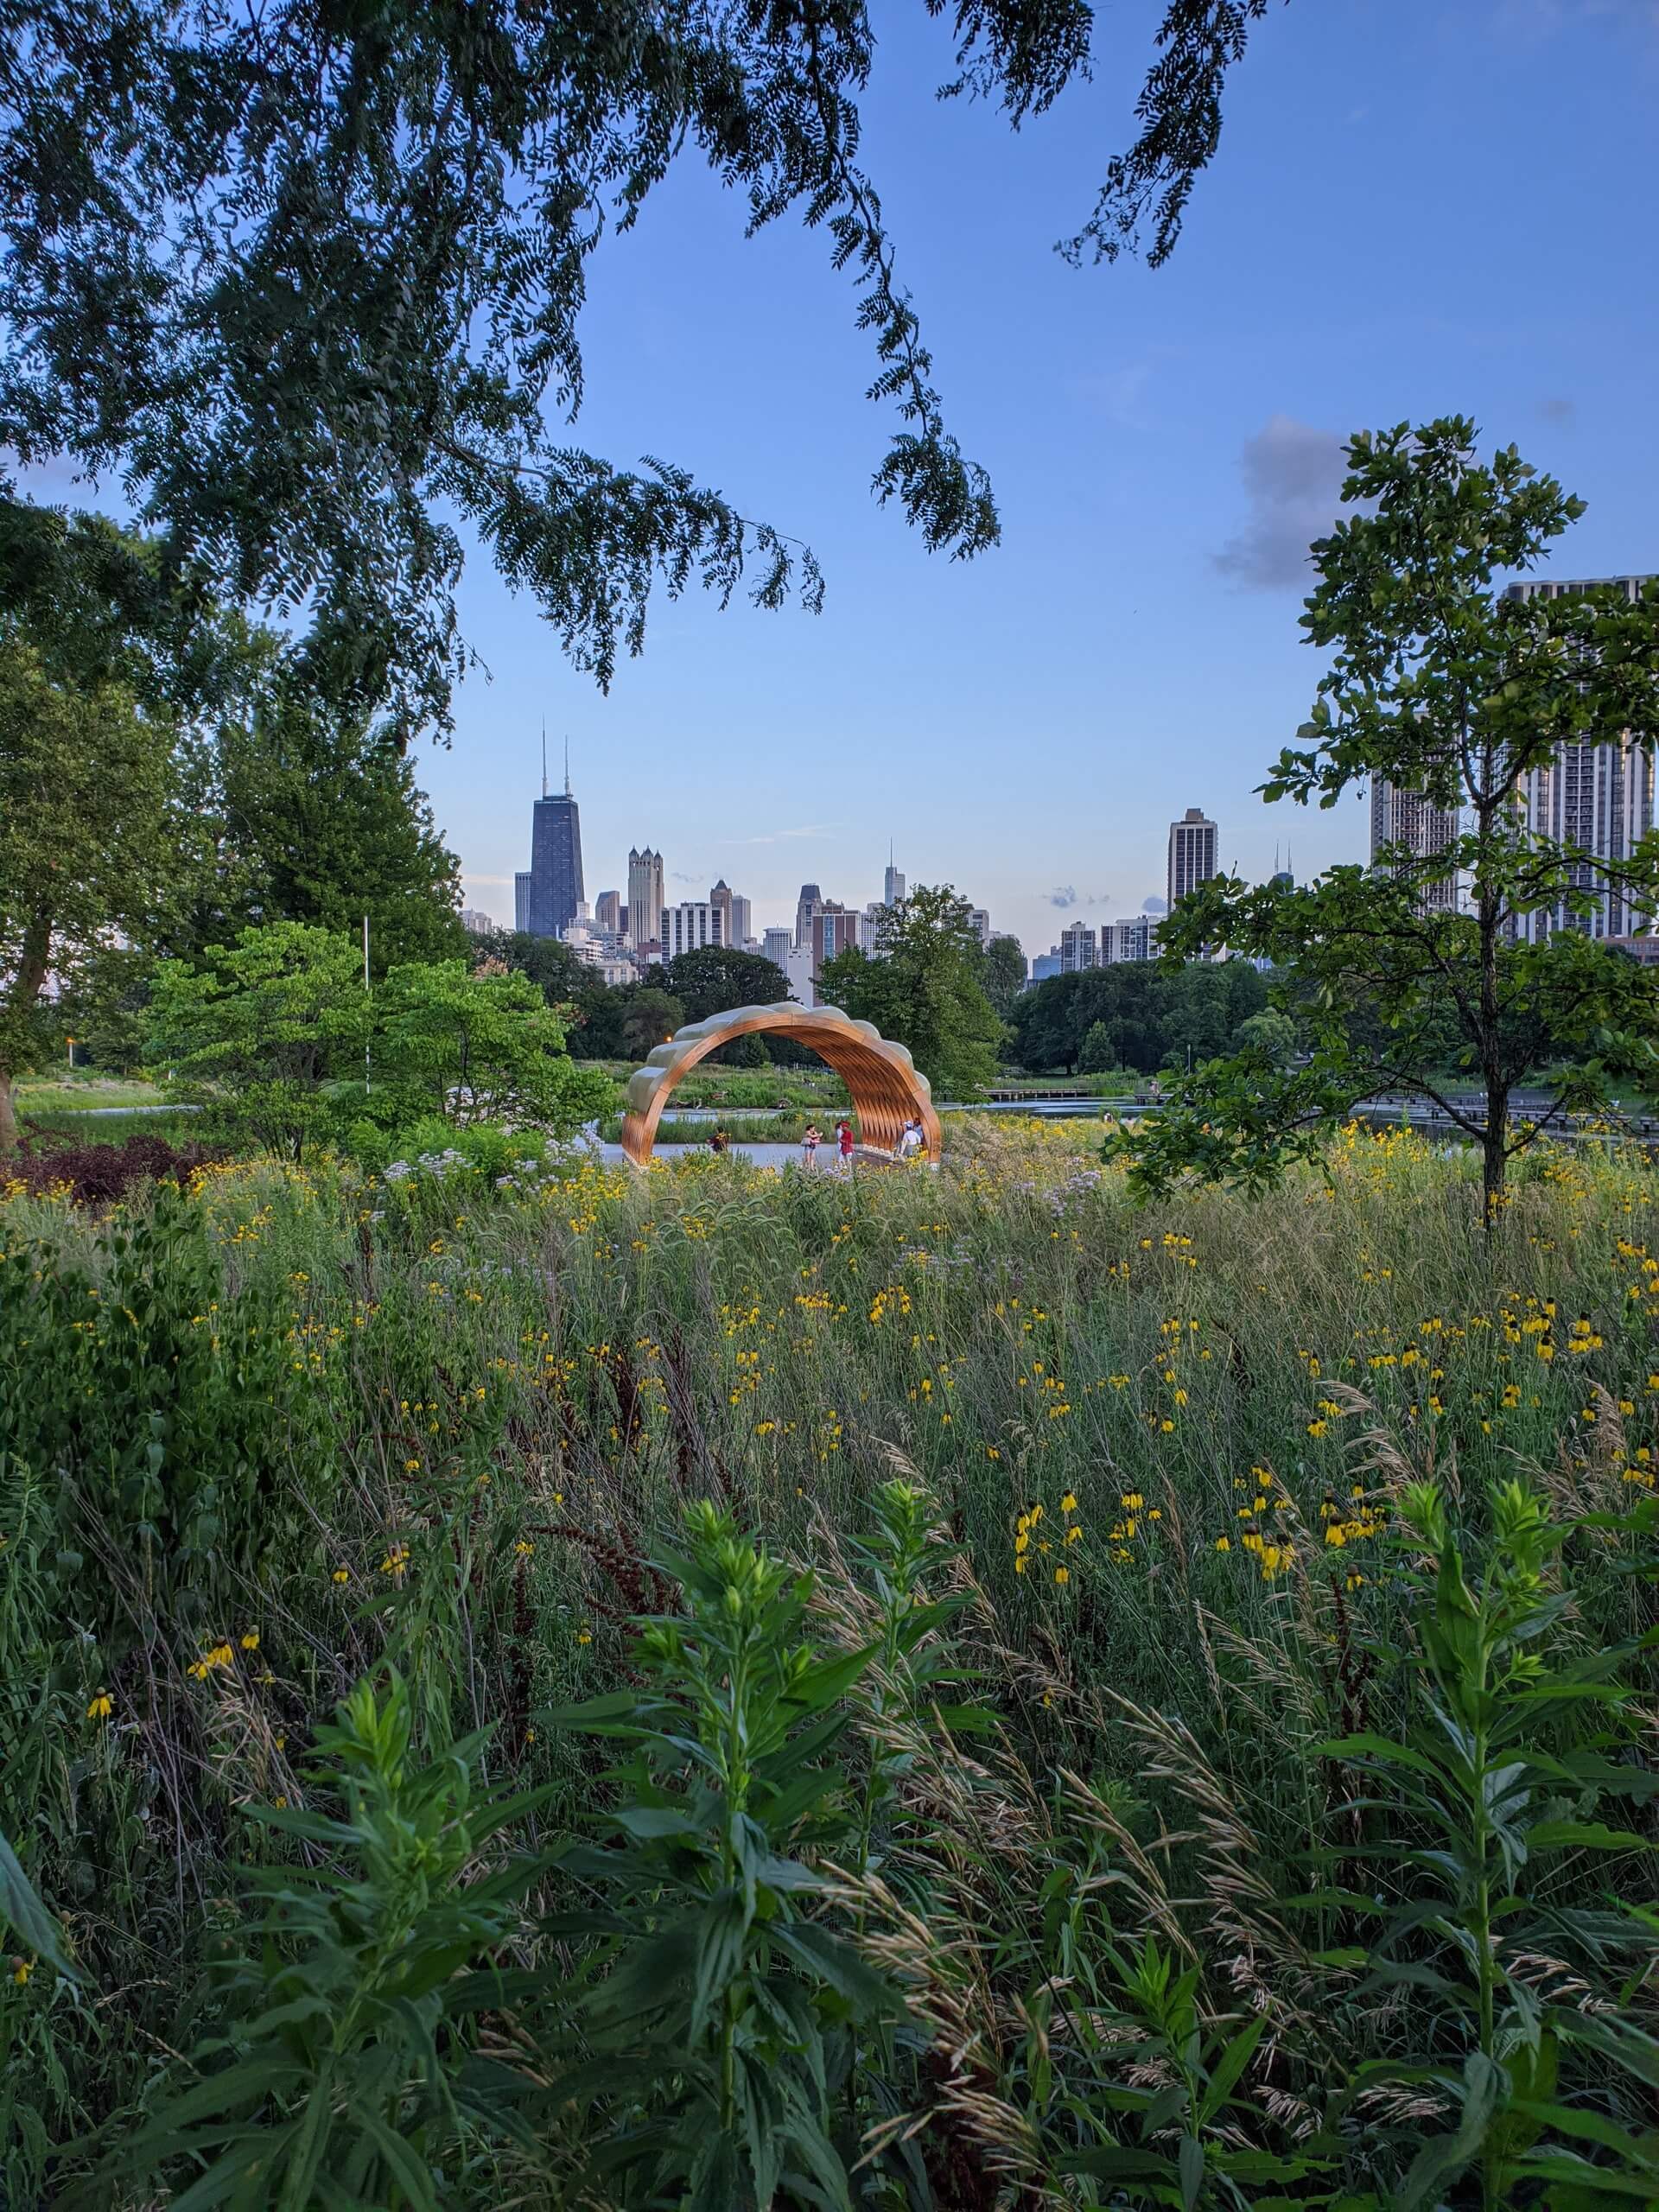 wildflowers amongst chicagos greenery in summer